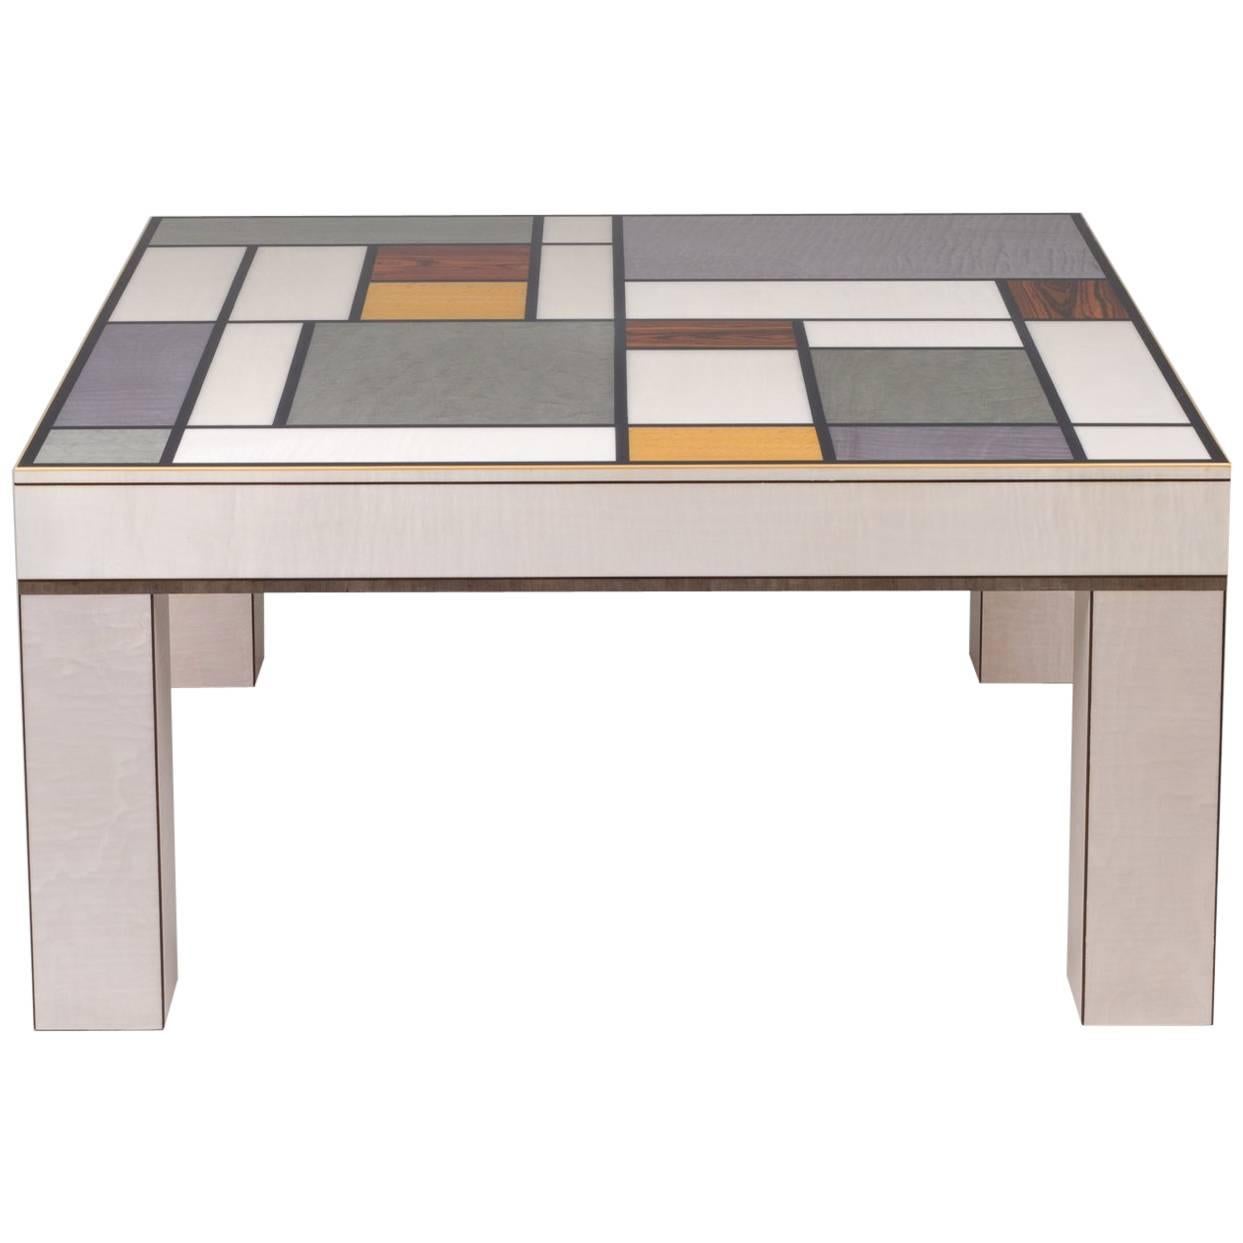 Quadrum Coffee Table For Sale